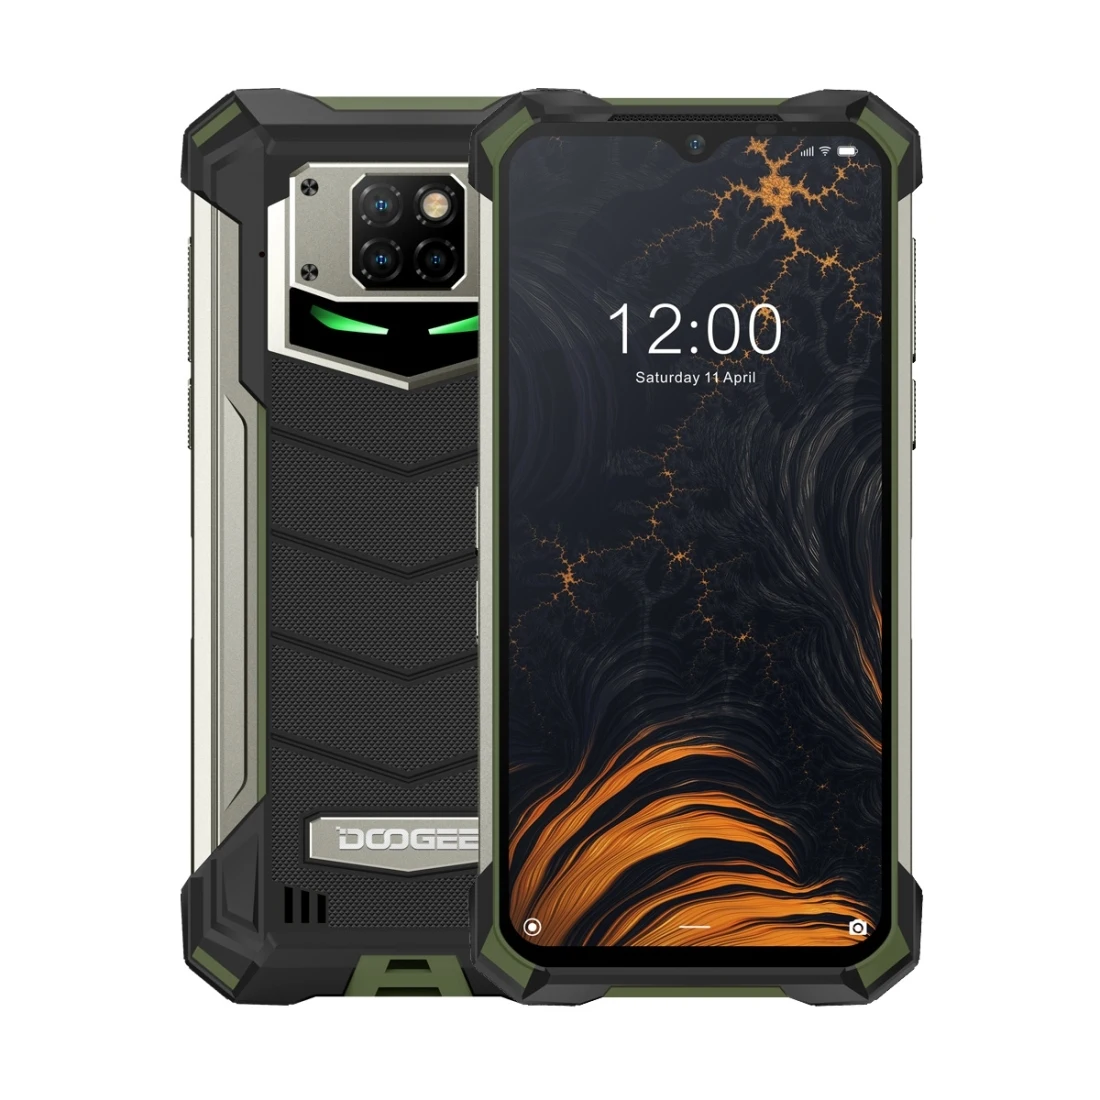 DOOGEE S88 Plus 128GB ROM 8GB RAM IP68/IP69K Rugged Phone Android 10 Helio P70 Octa-Core 6.3" Display 48MP Cams Wireless Charge